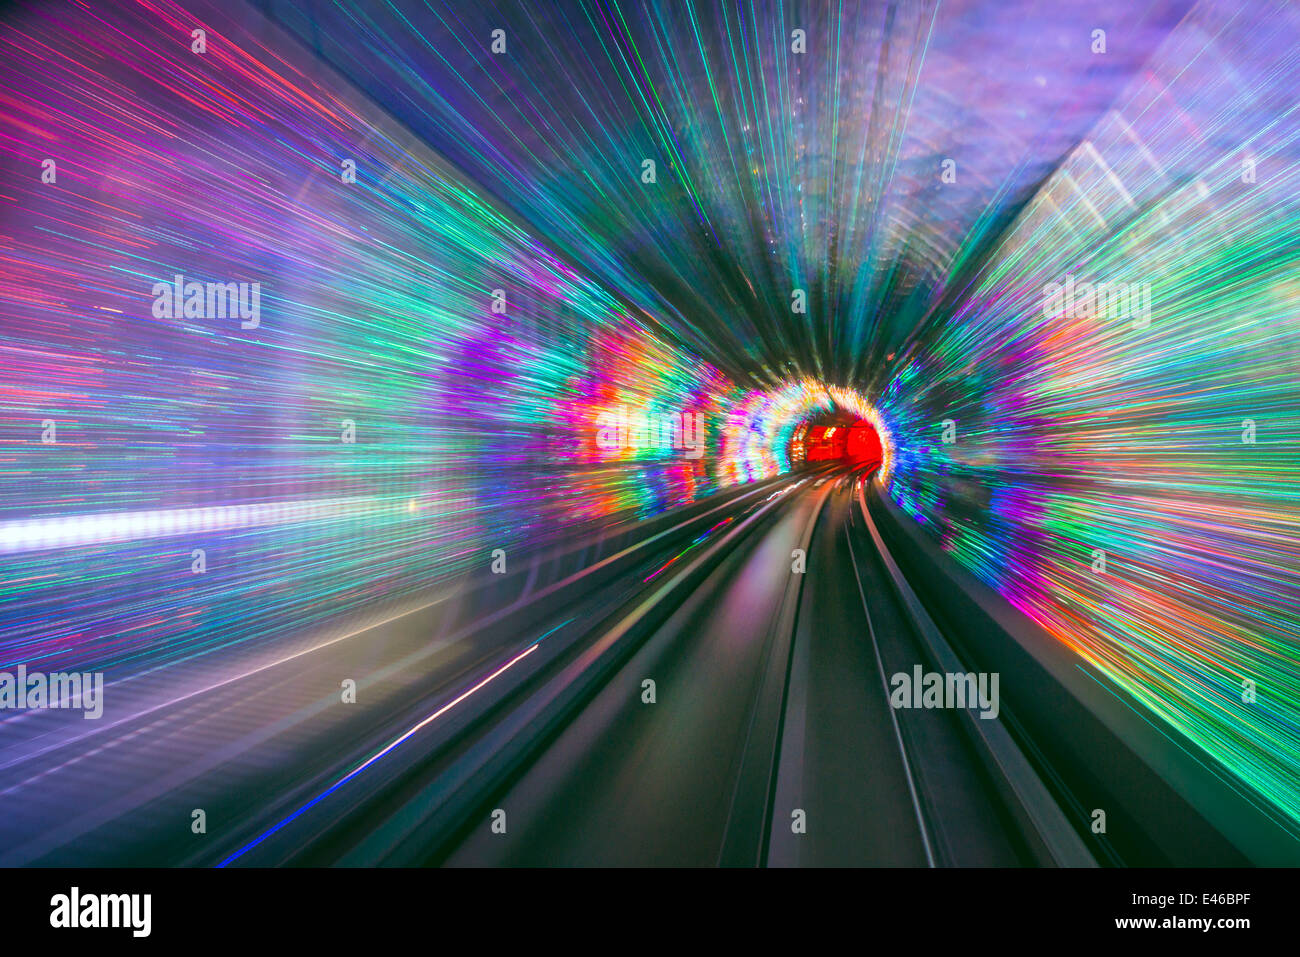 Sightseeing tunnel lights under the Huangpu River in Shanghai, China. Stock Photo